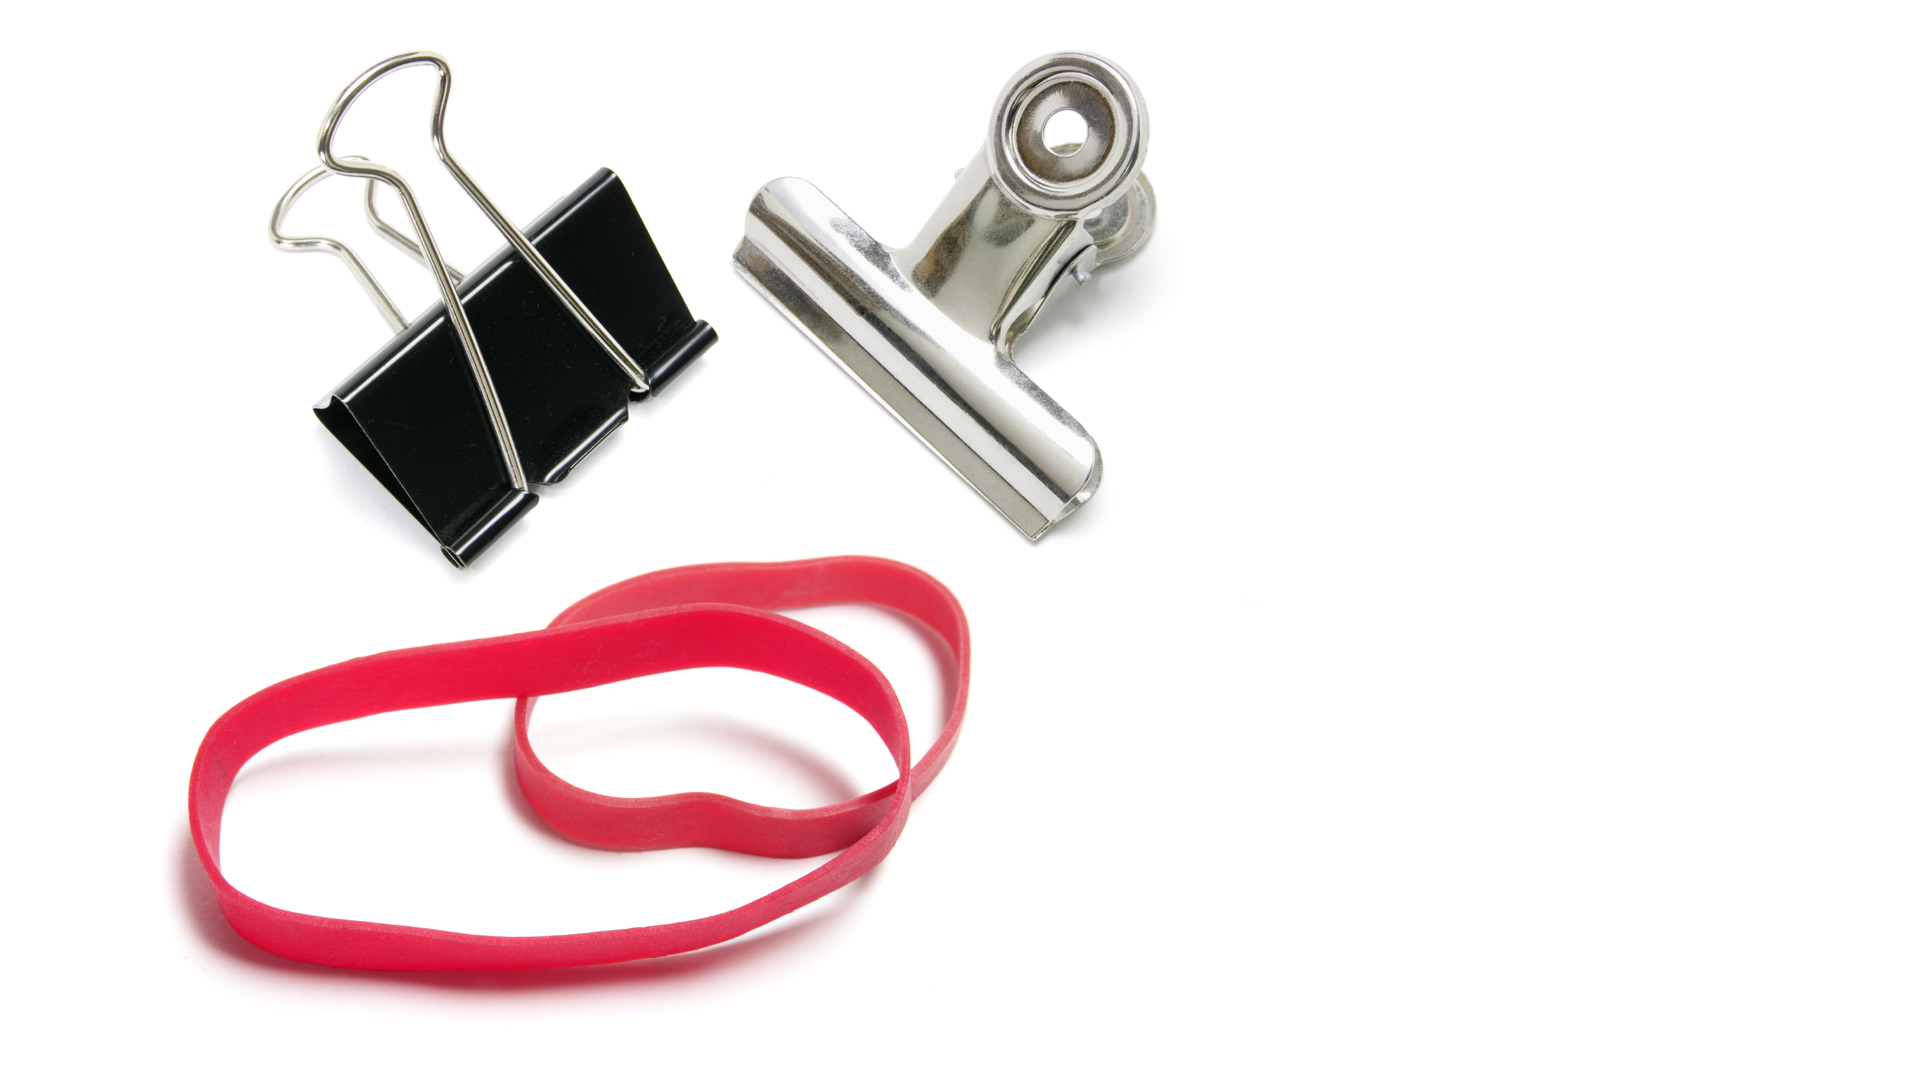 slide: two bulldog clips and a rubber band